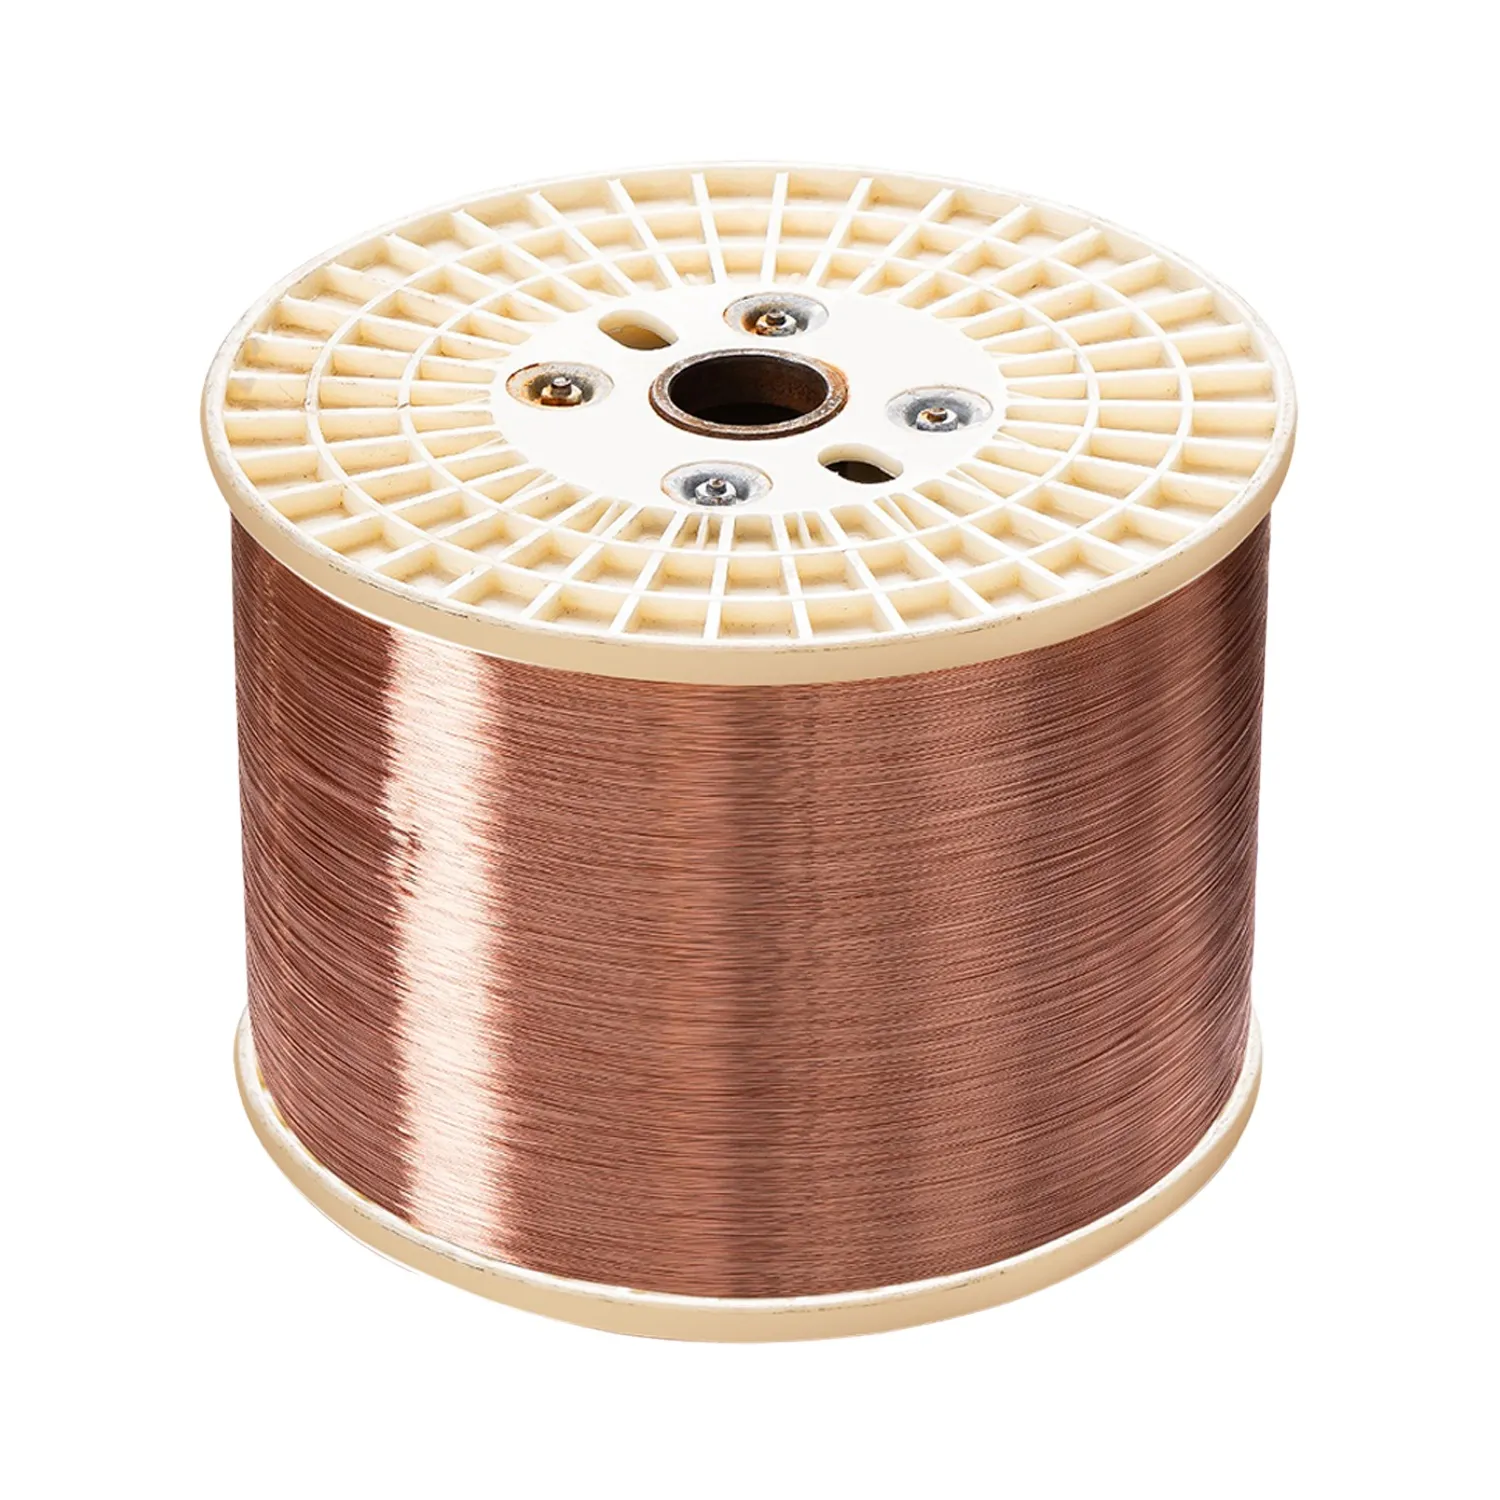 Annealed Copper Wire (2.6mm)